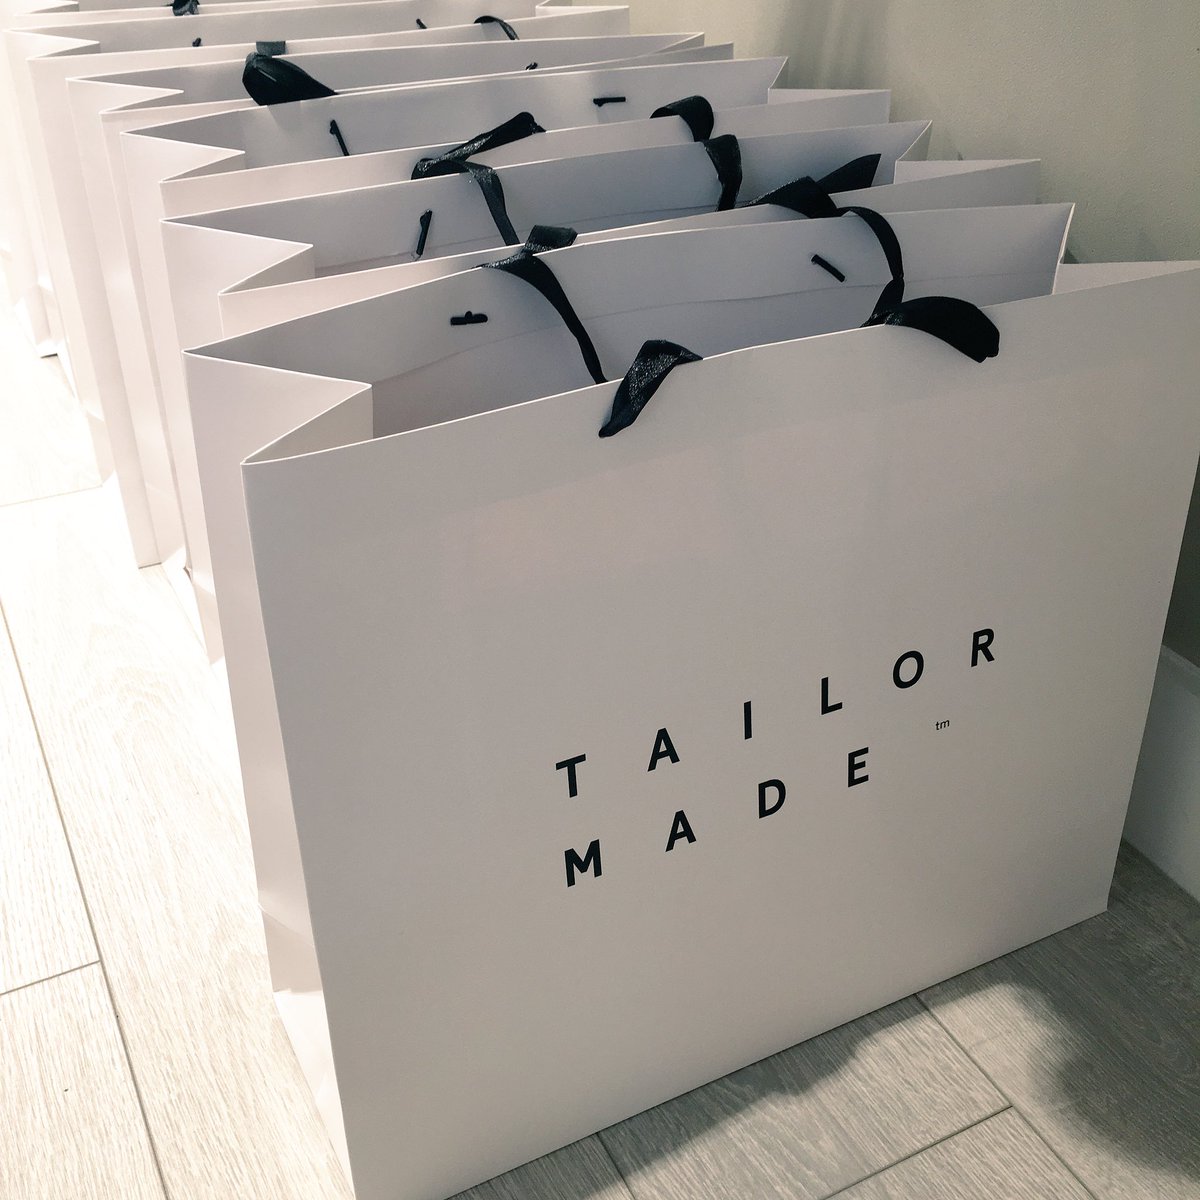 Our goodie bags are prepped & ready for our store launch tonight! Treats from @PankhurstLondon @kiteeyewear and @LiveLimitlessUK inside 👌🏼 #tailormadelondon